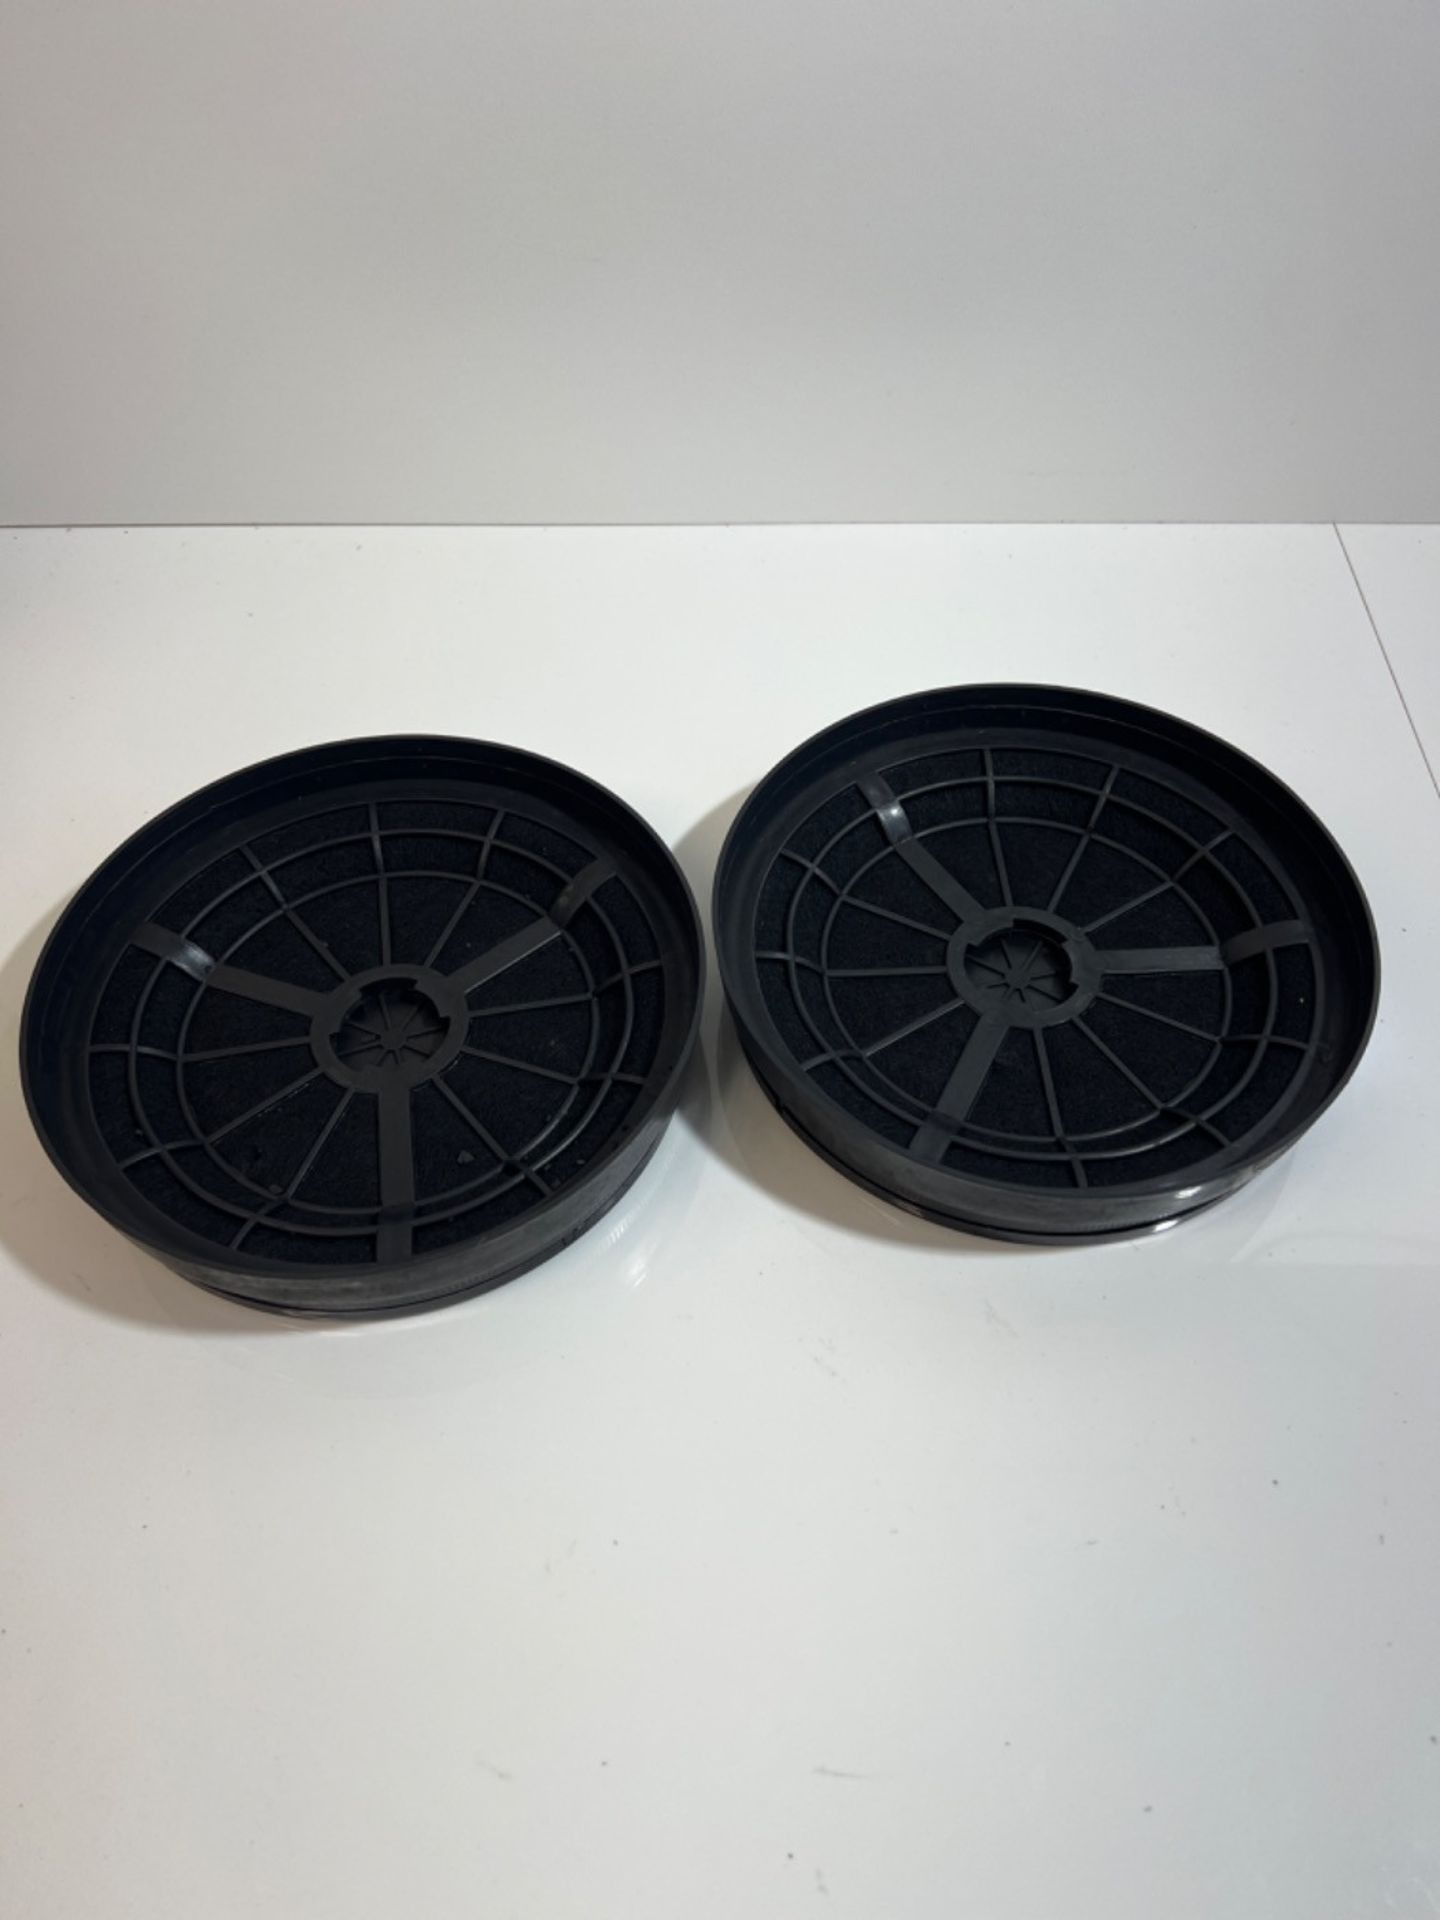 Activated Carbon Filter (x2) Suitable for Various Cooker Hoods by Respecta, Bomann, PKM